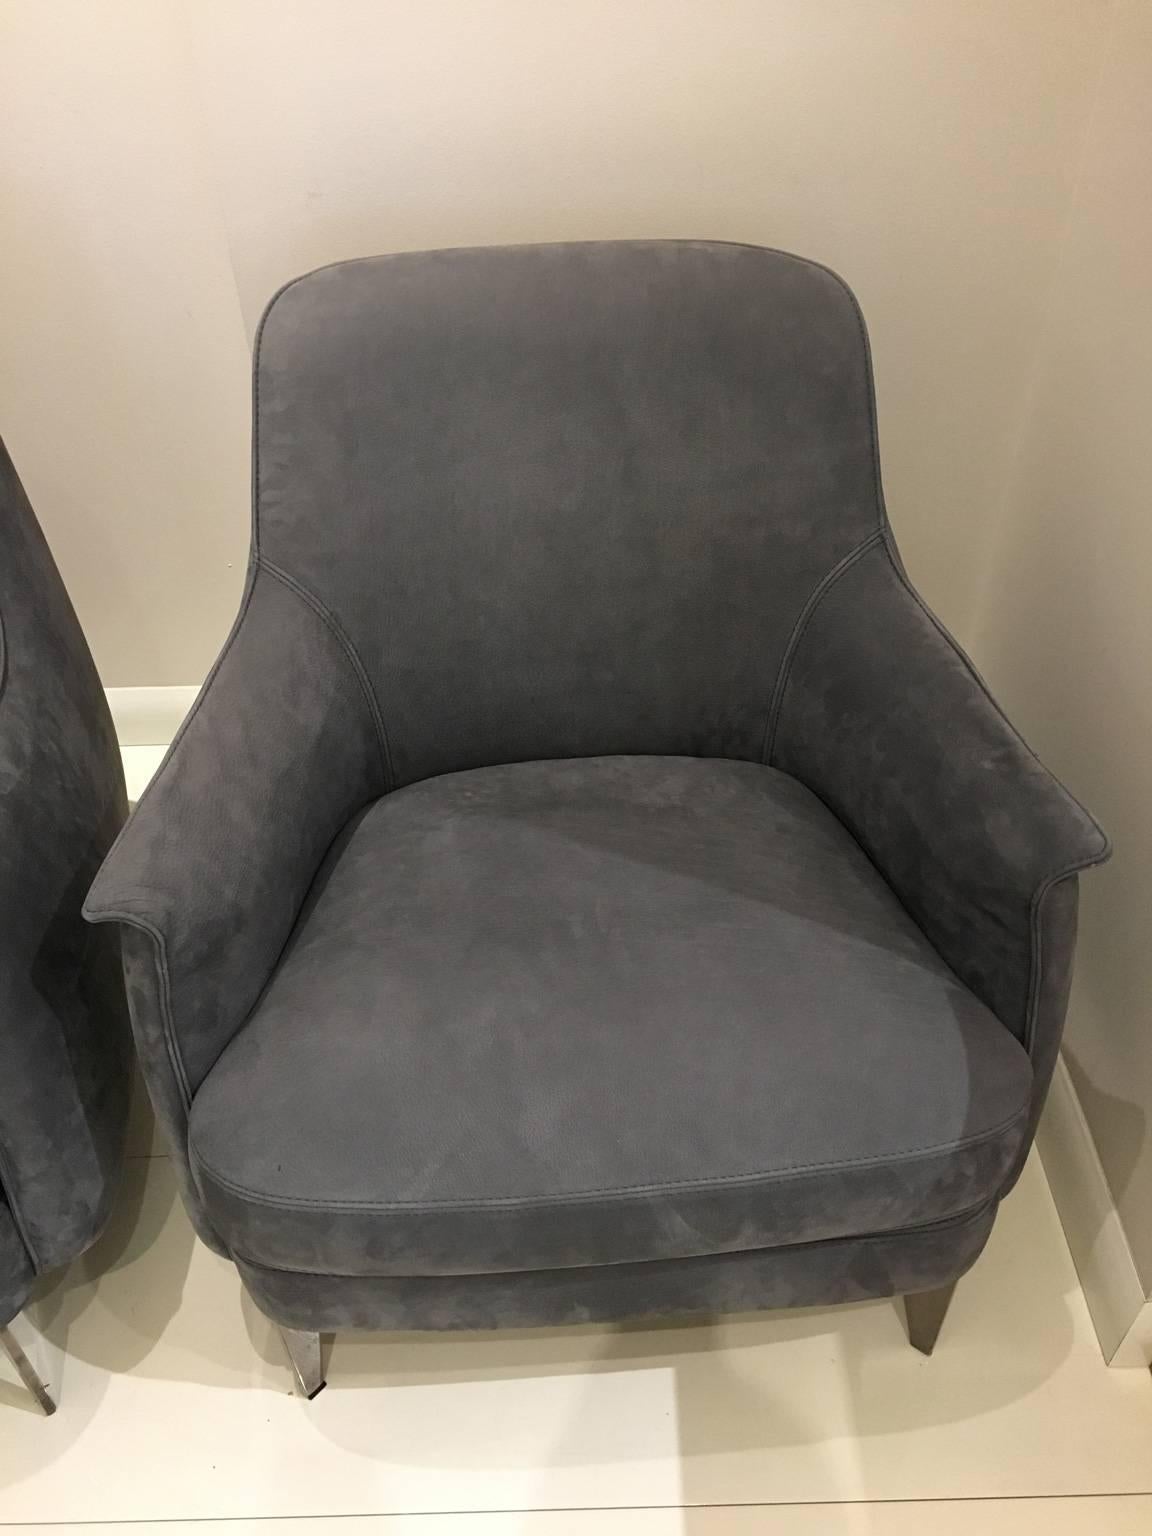 Modern Pair of Armchairs in Light Grey Nubuk Leather with Black Chrome Legs by Cierre